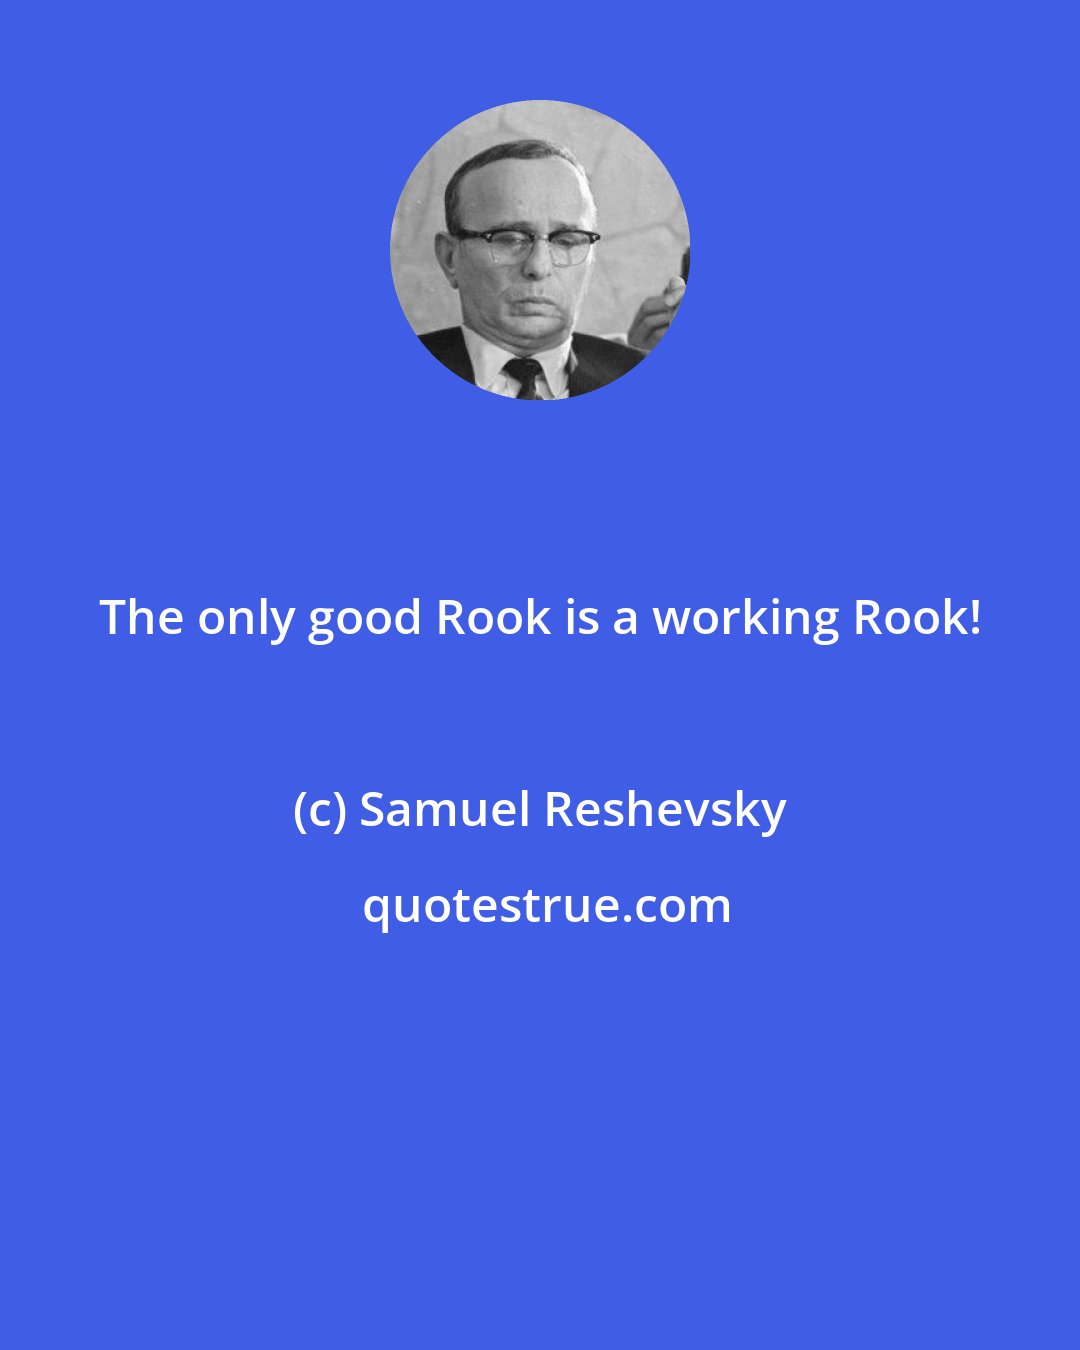 Samuel Reshevsky: The only good Rook is a working Rook!